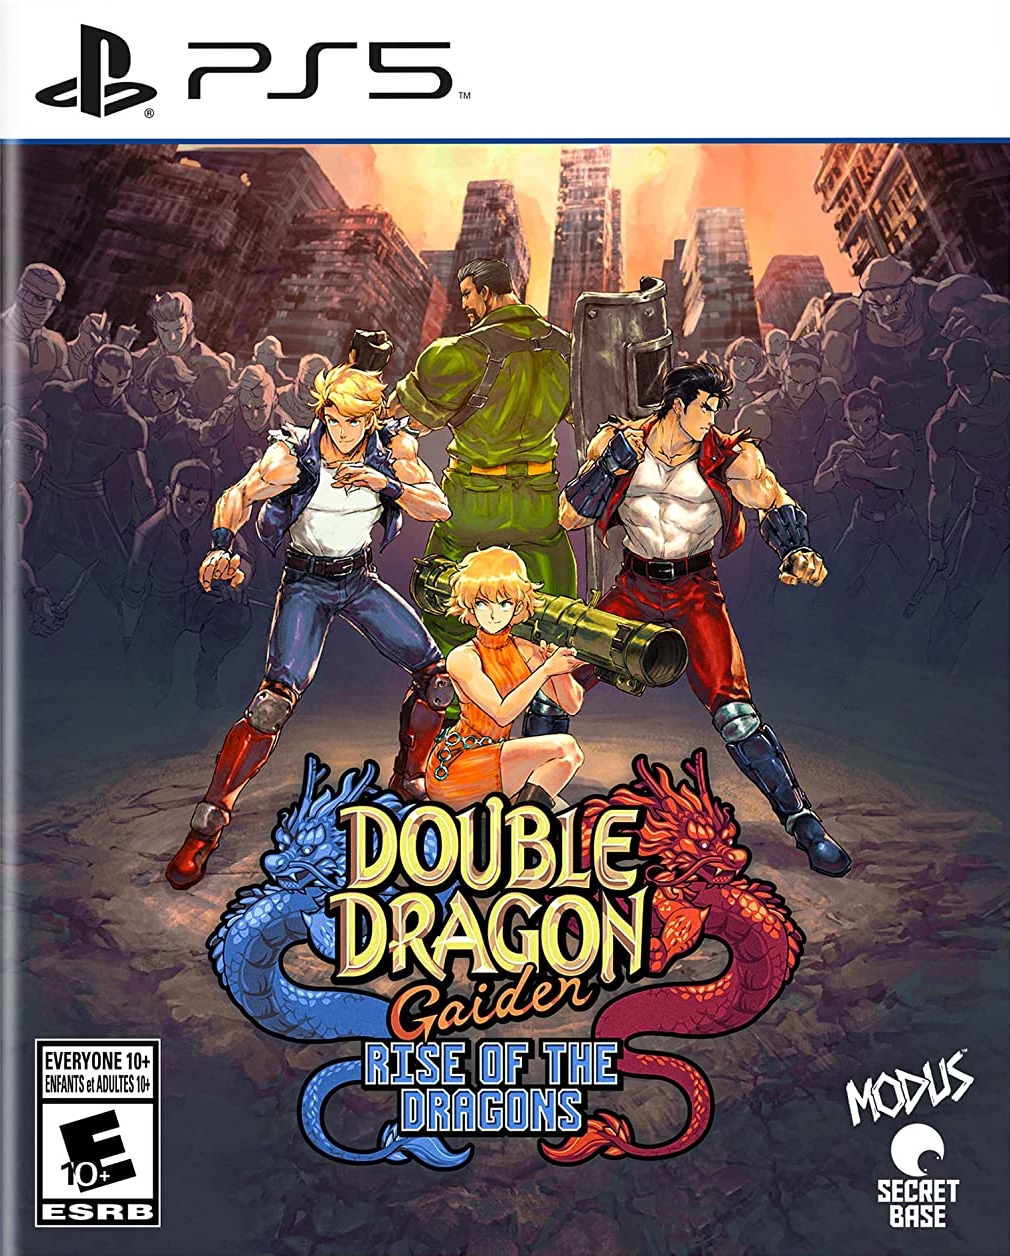 double dragon and 1 more drawn by david_liu